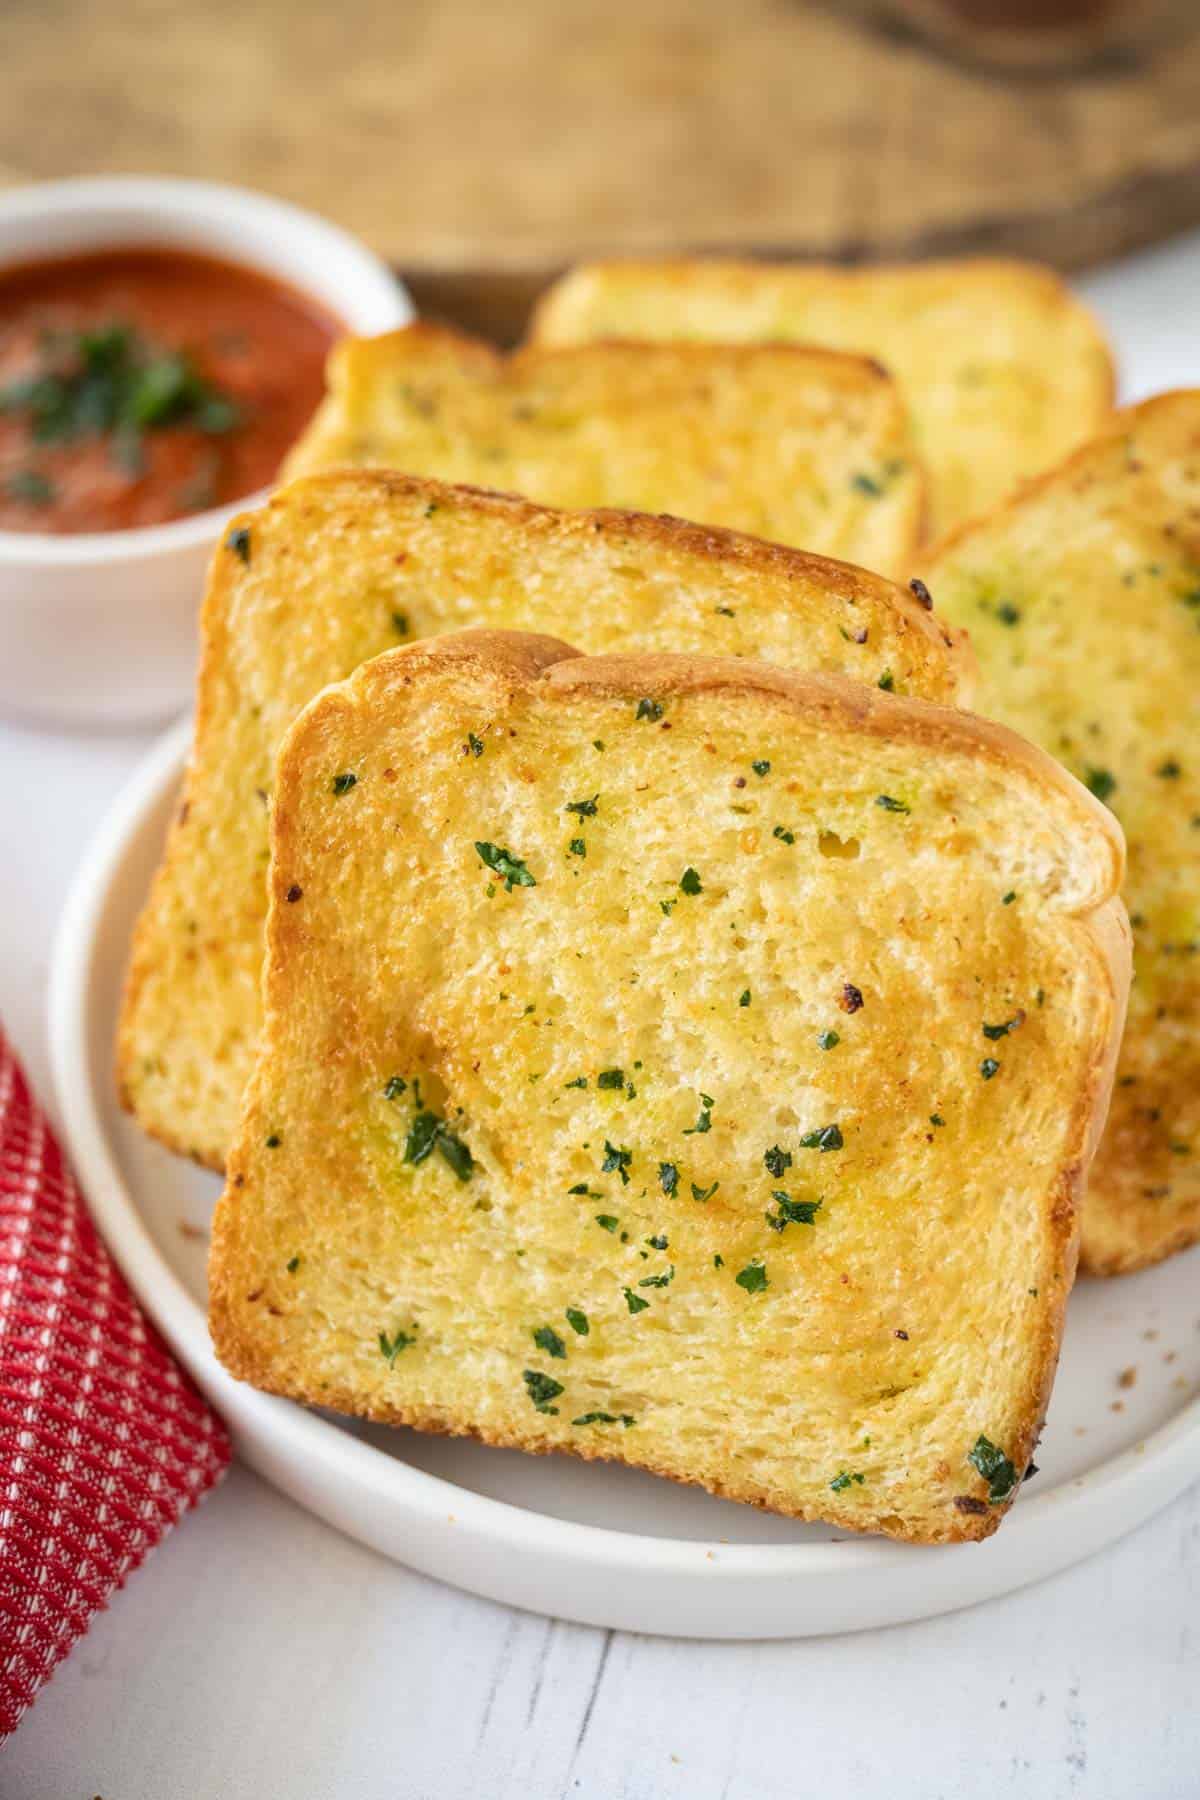 Slices of air fryer texas toast on a white plate stacked sideways showing the melted butter, garlic, and parsley on the garlic bread.